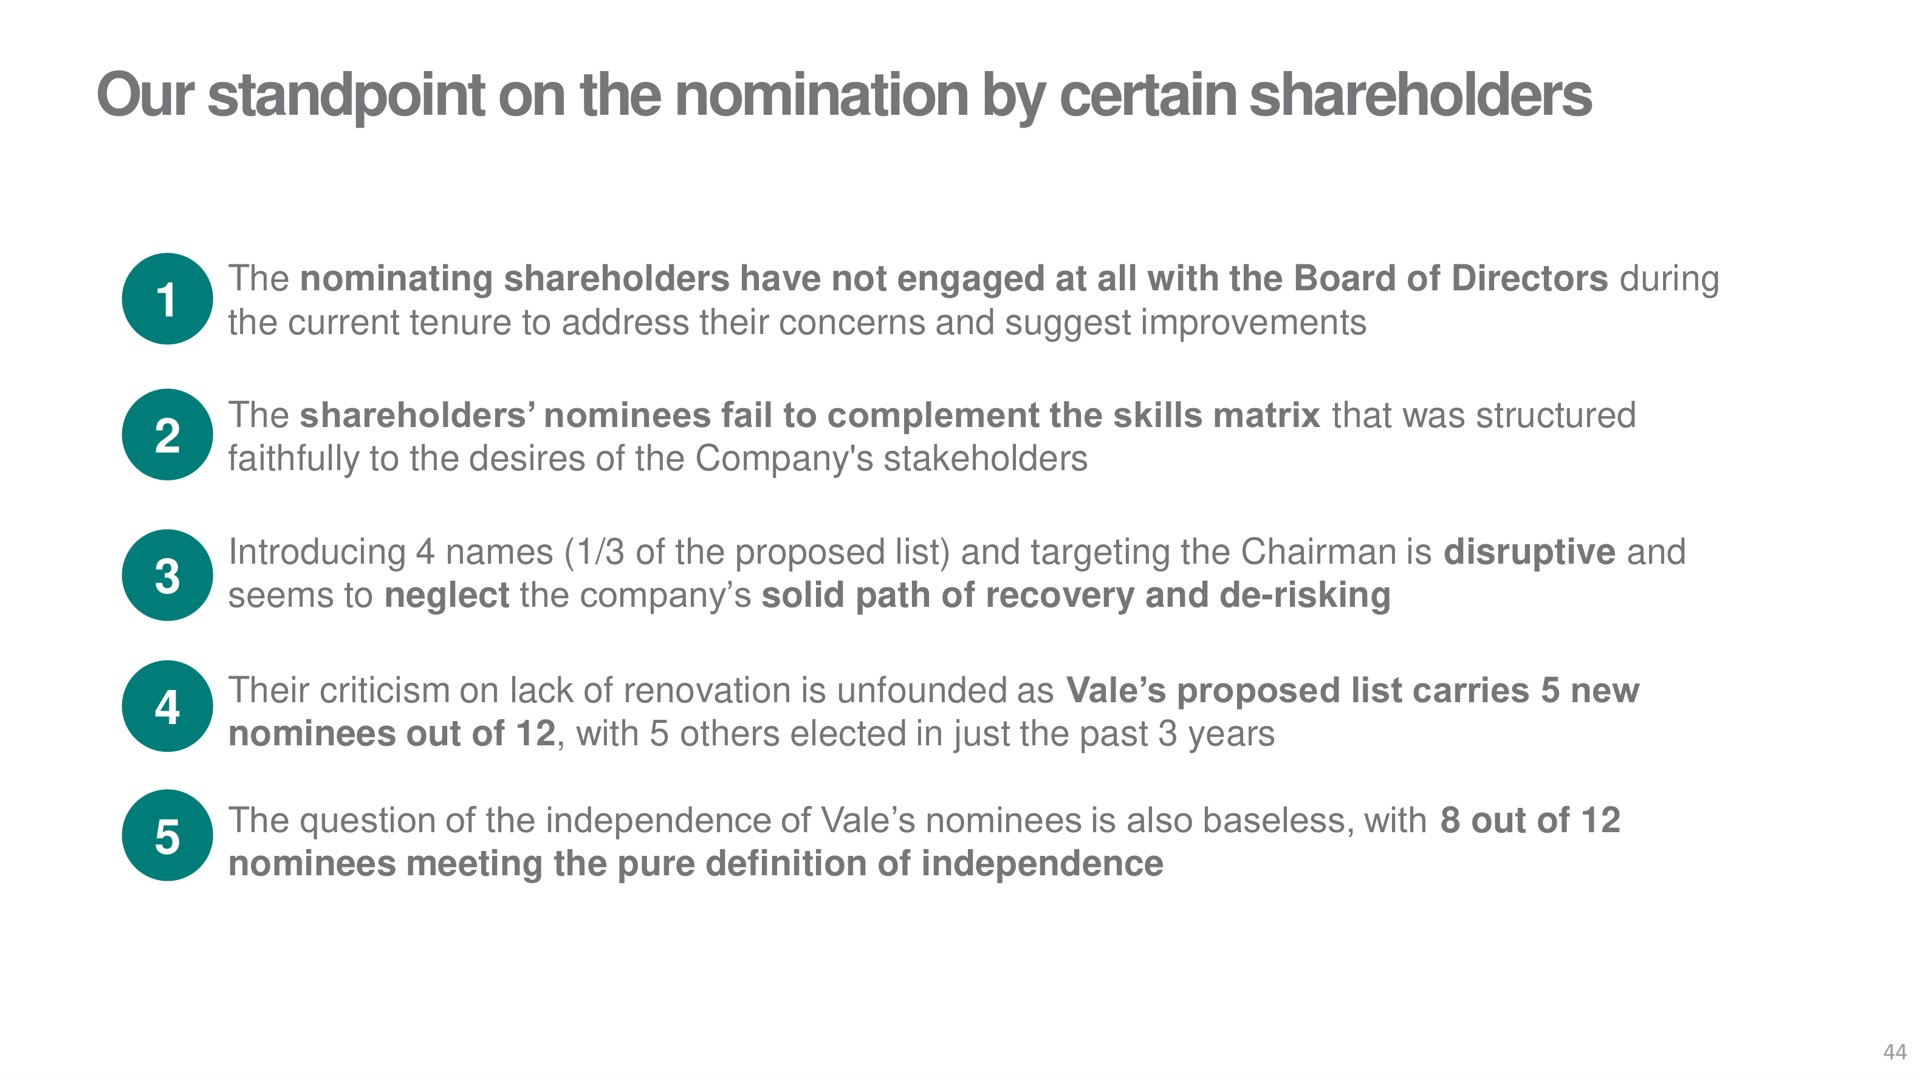 our standpoint on the nomination by certain shareholders nominating have not engaged at all with board of directors during current tenure to address their concerns and suggest improvements nominees fail to complement skills matrix that was structured faithfully to desires of company stakeholders introducing names of proposed list and targeting chairman is disruptive and seems to neglect company solid path of recovery and risking their criticism lack of renovation is unfounded as vale proposed list carries new nominees out of with elected in just past years nominees meeting pure definition of independence | Vale